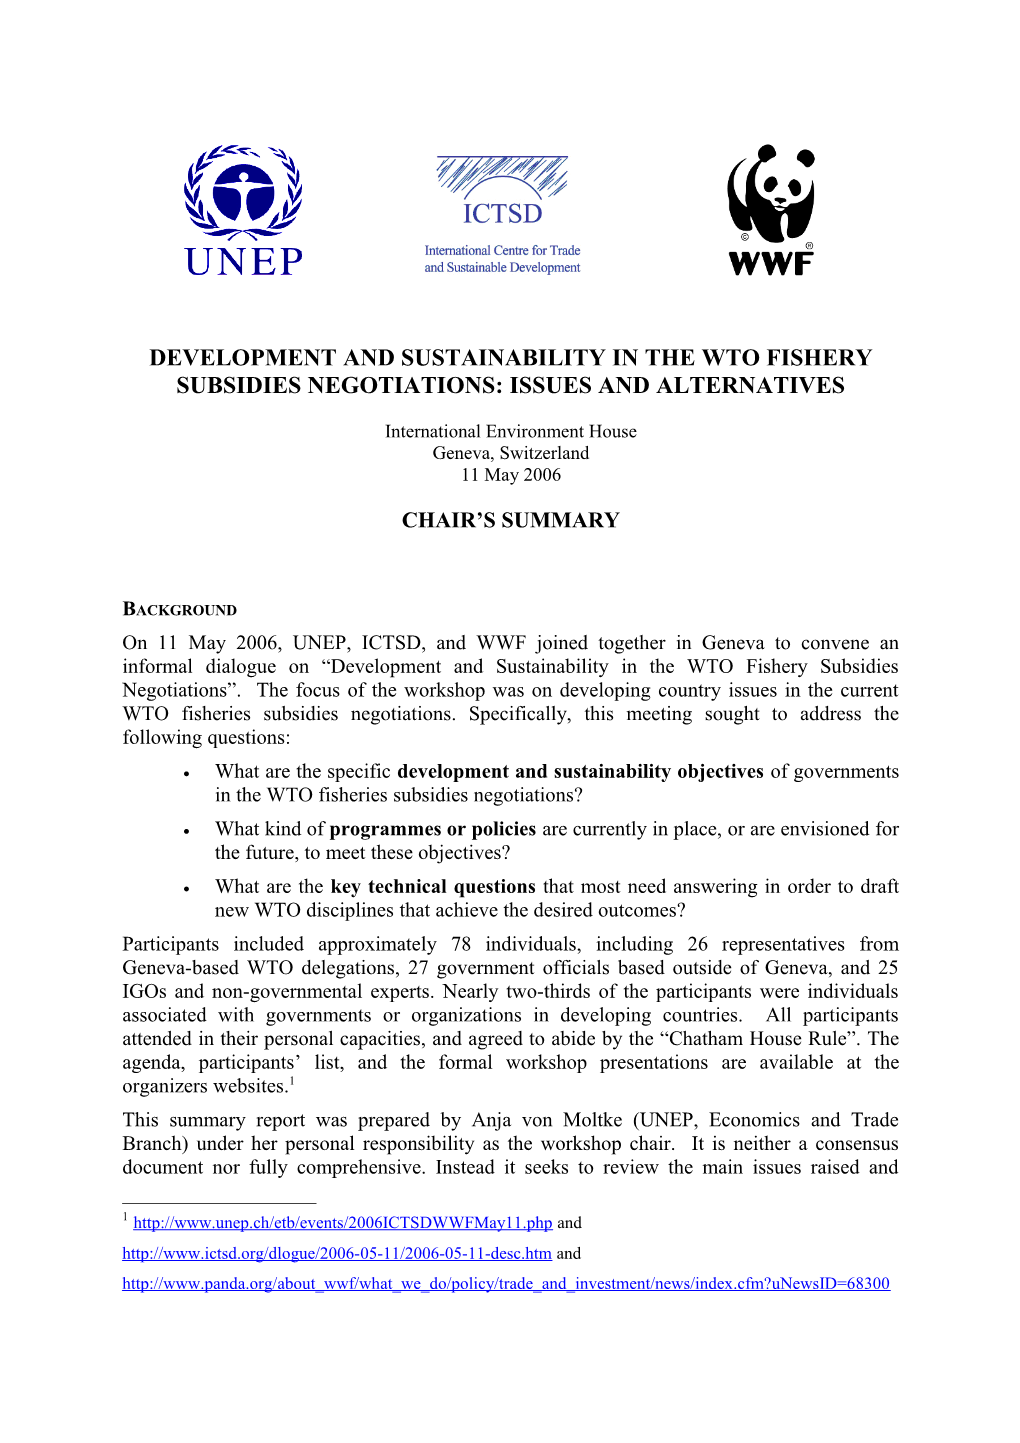 Development and Sustainability in the Wto Fishery Subsidies Negotiations: Issues And